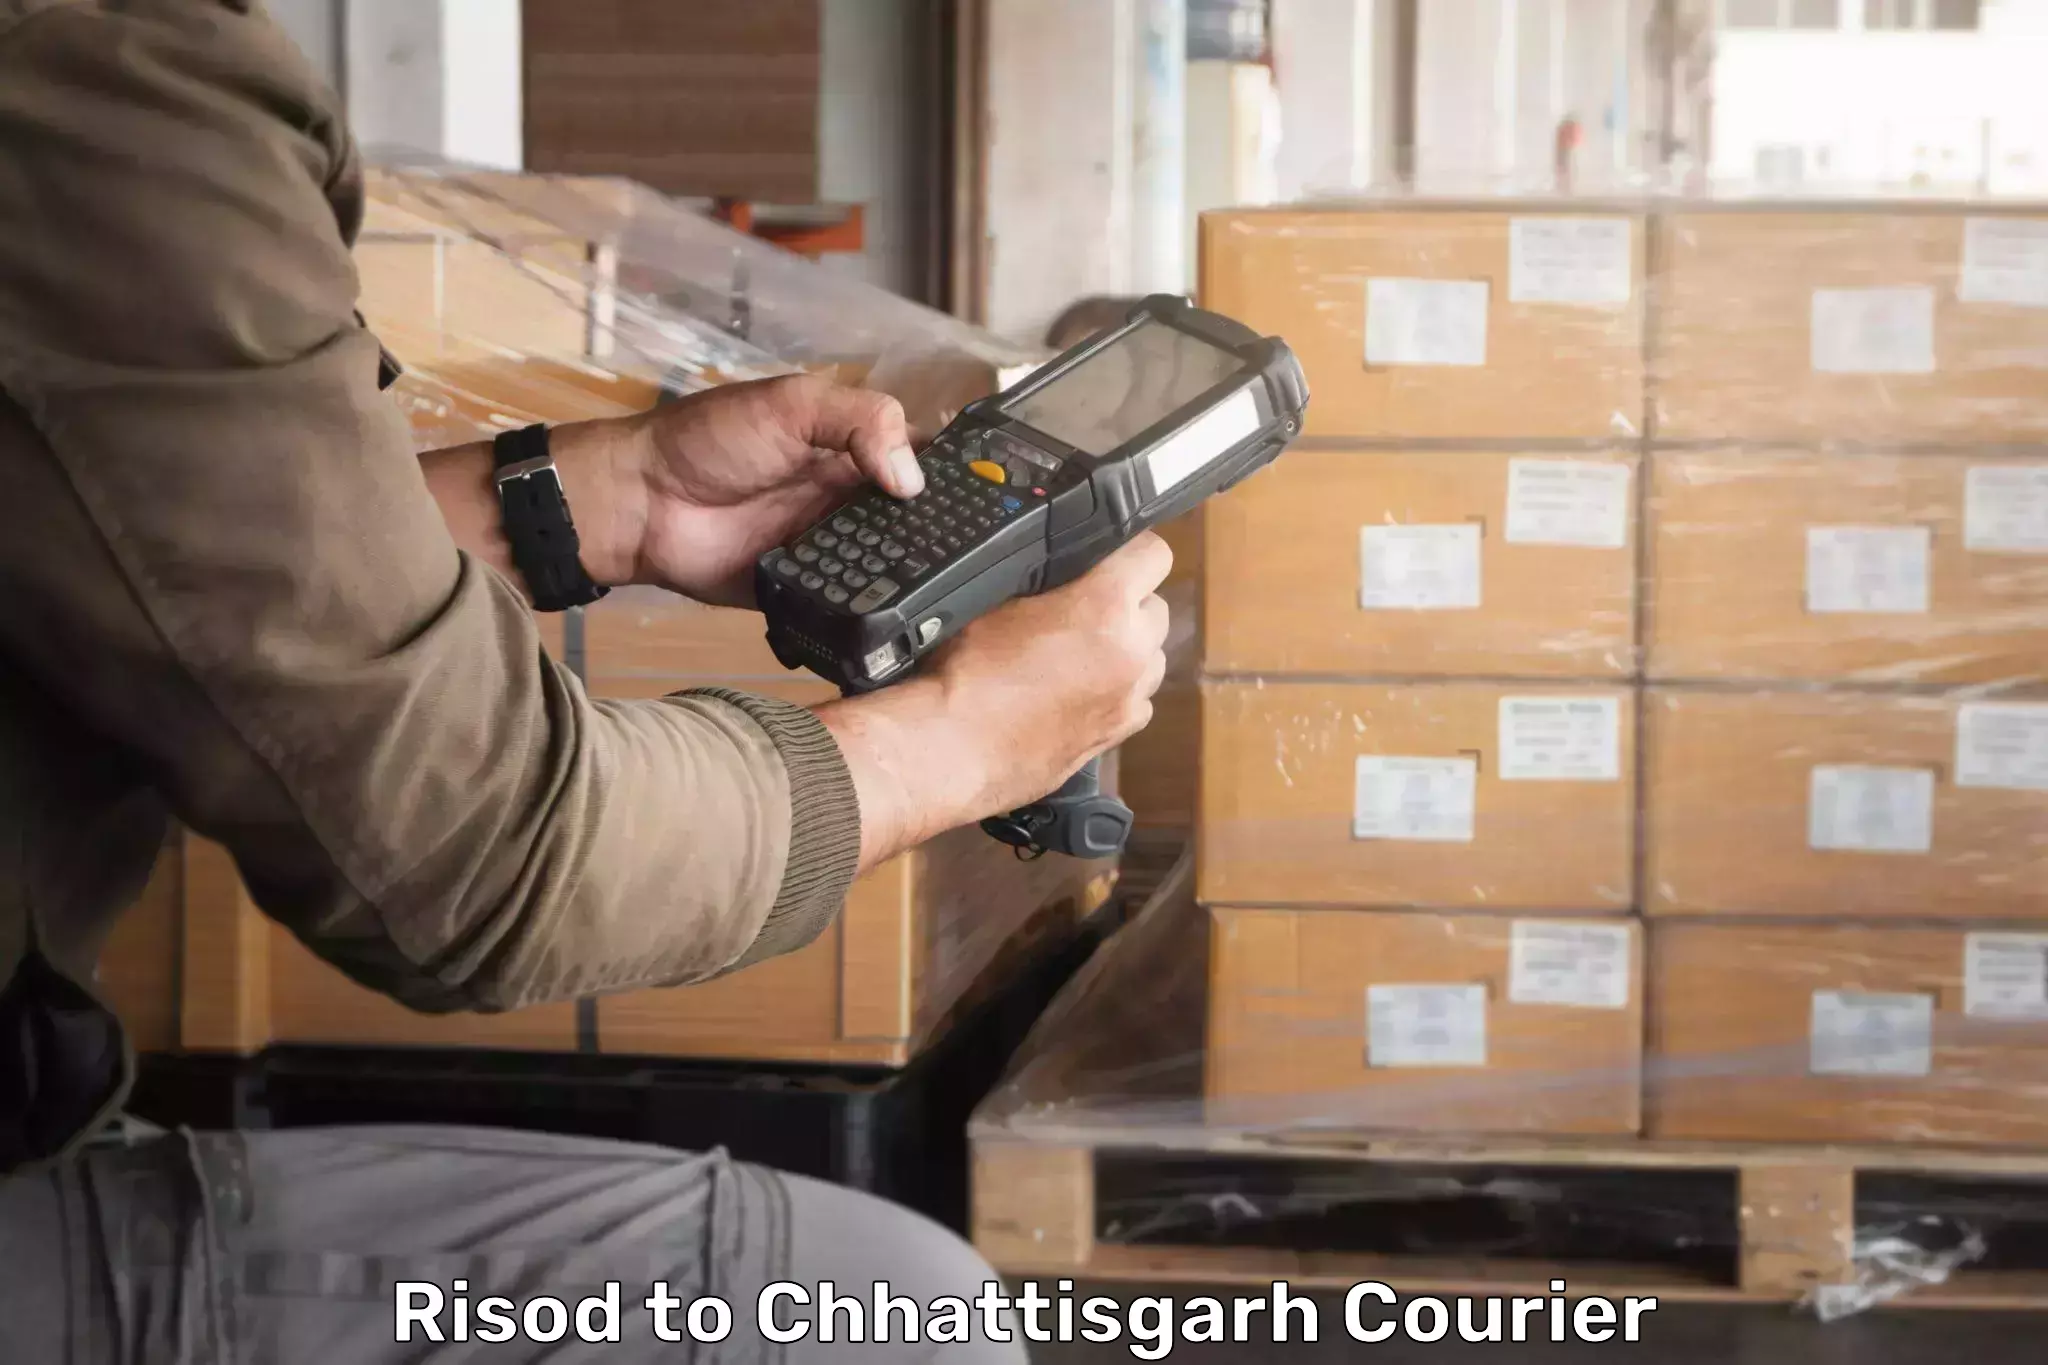 Global courier networks Risod to Kanker